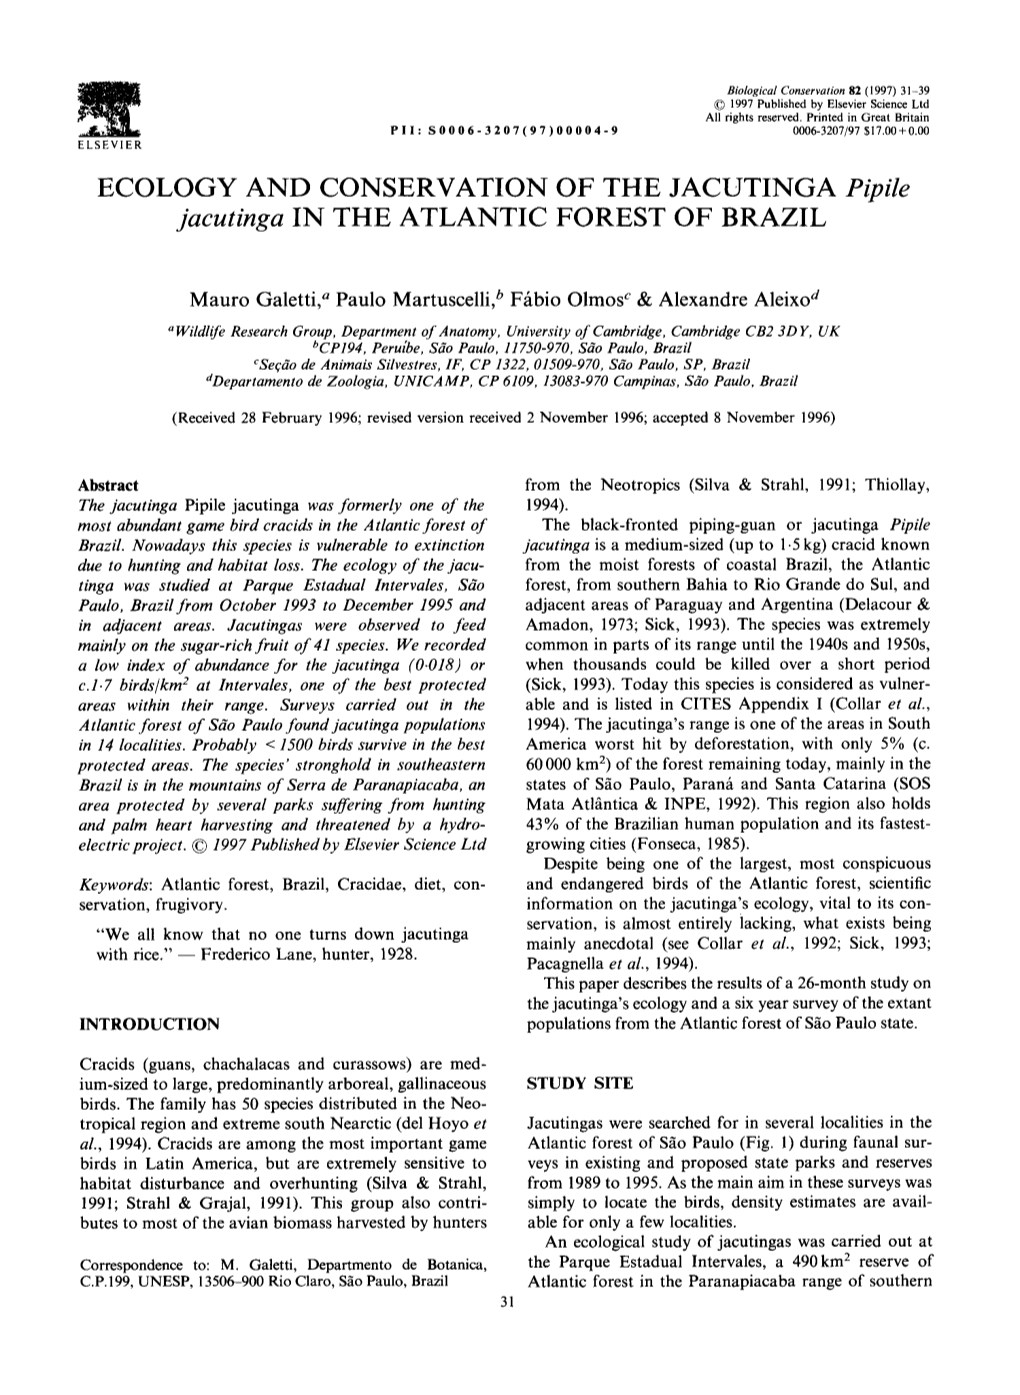 ECOLOGY and CONSERVATION of the JACUTINGA Pipile Jacutinga in the ATLANTIC FOREST of BRAZIL